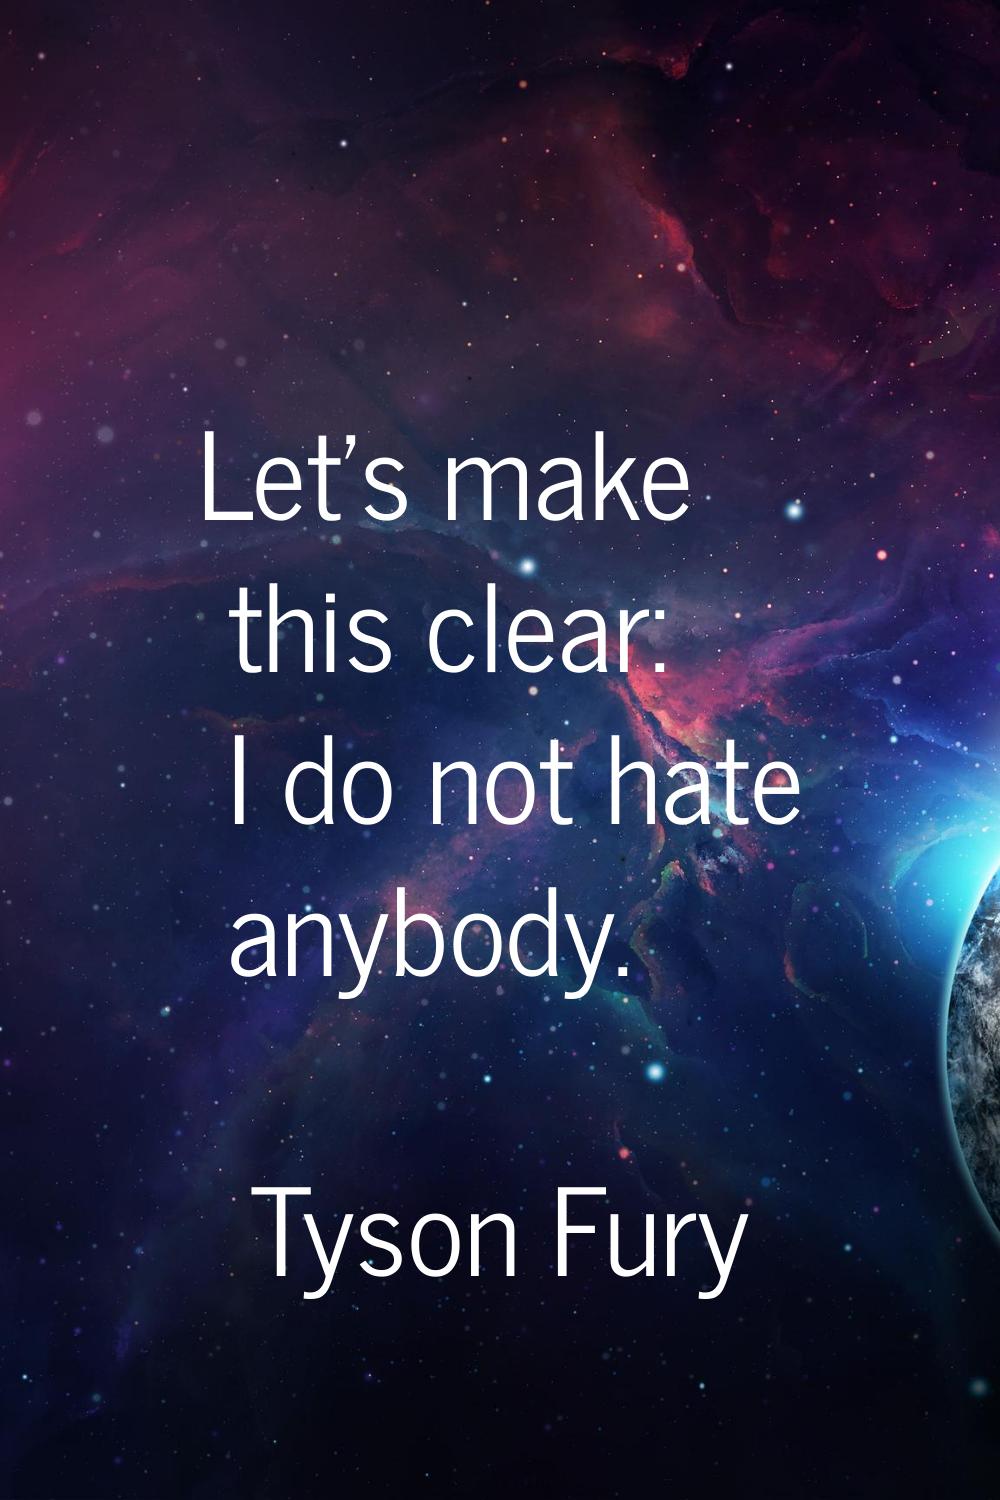 Let's make this clear: I do not hate anybody.